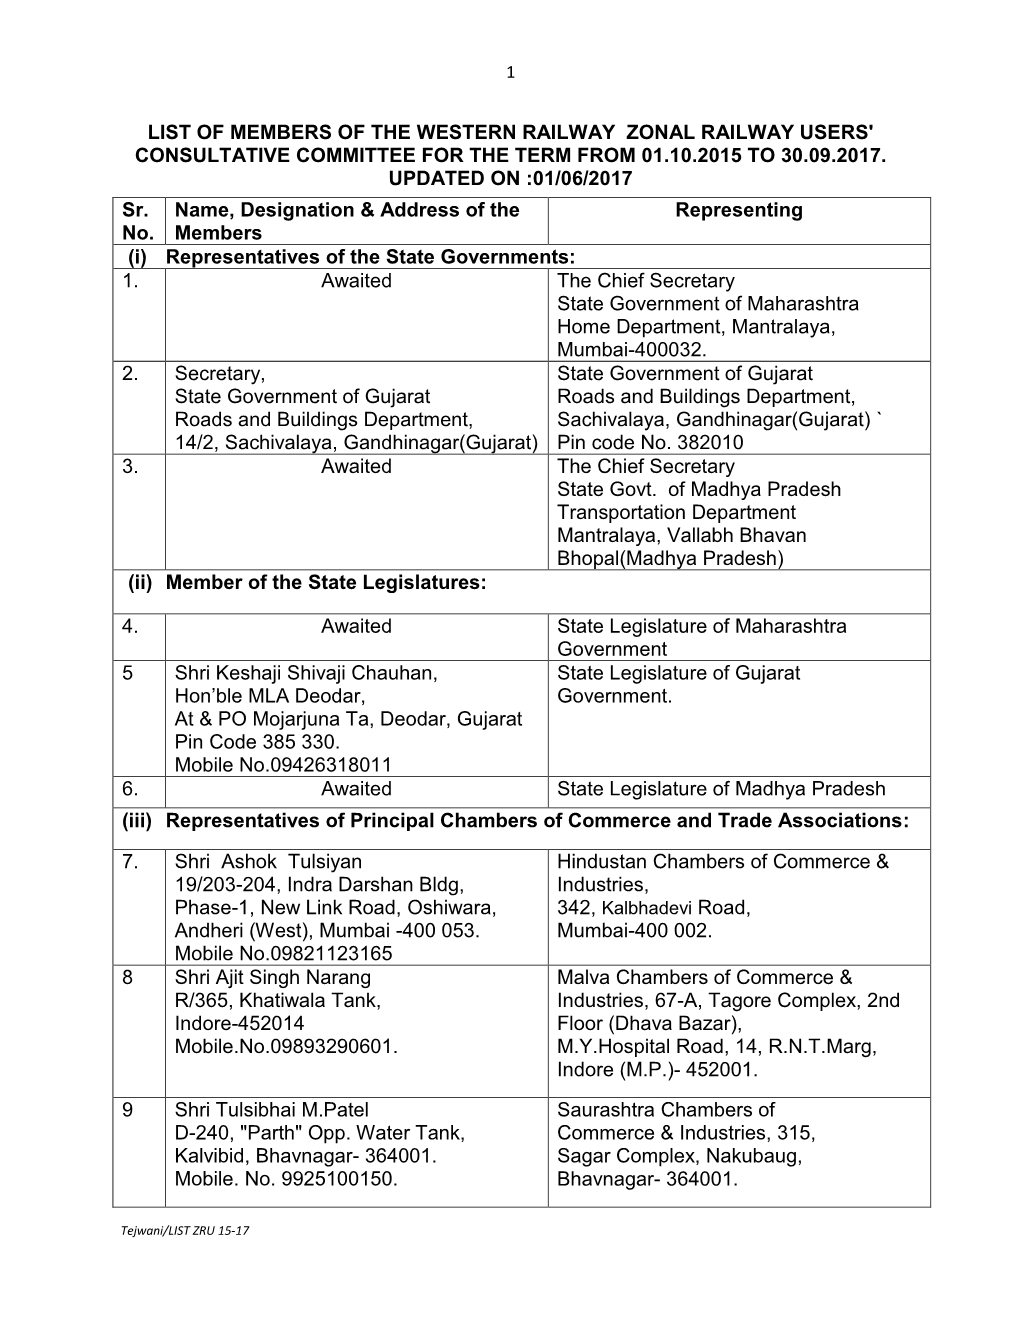 List of Members of the Western Railway Zonal Railway Users' Consultative Committee for the Term from 01.10.2015 to 30.09.2017